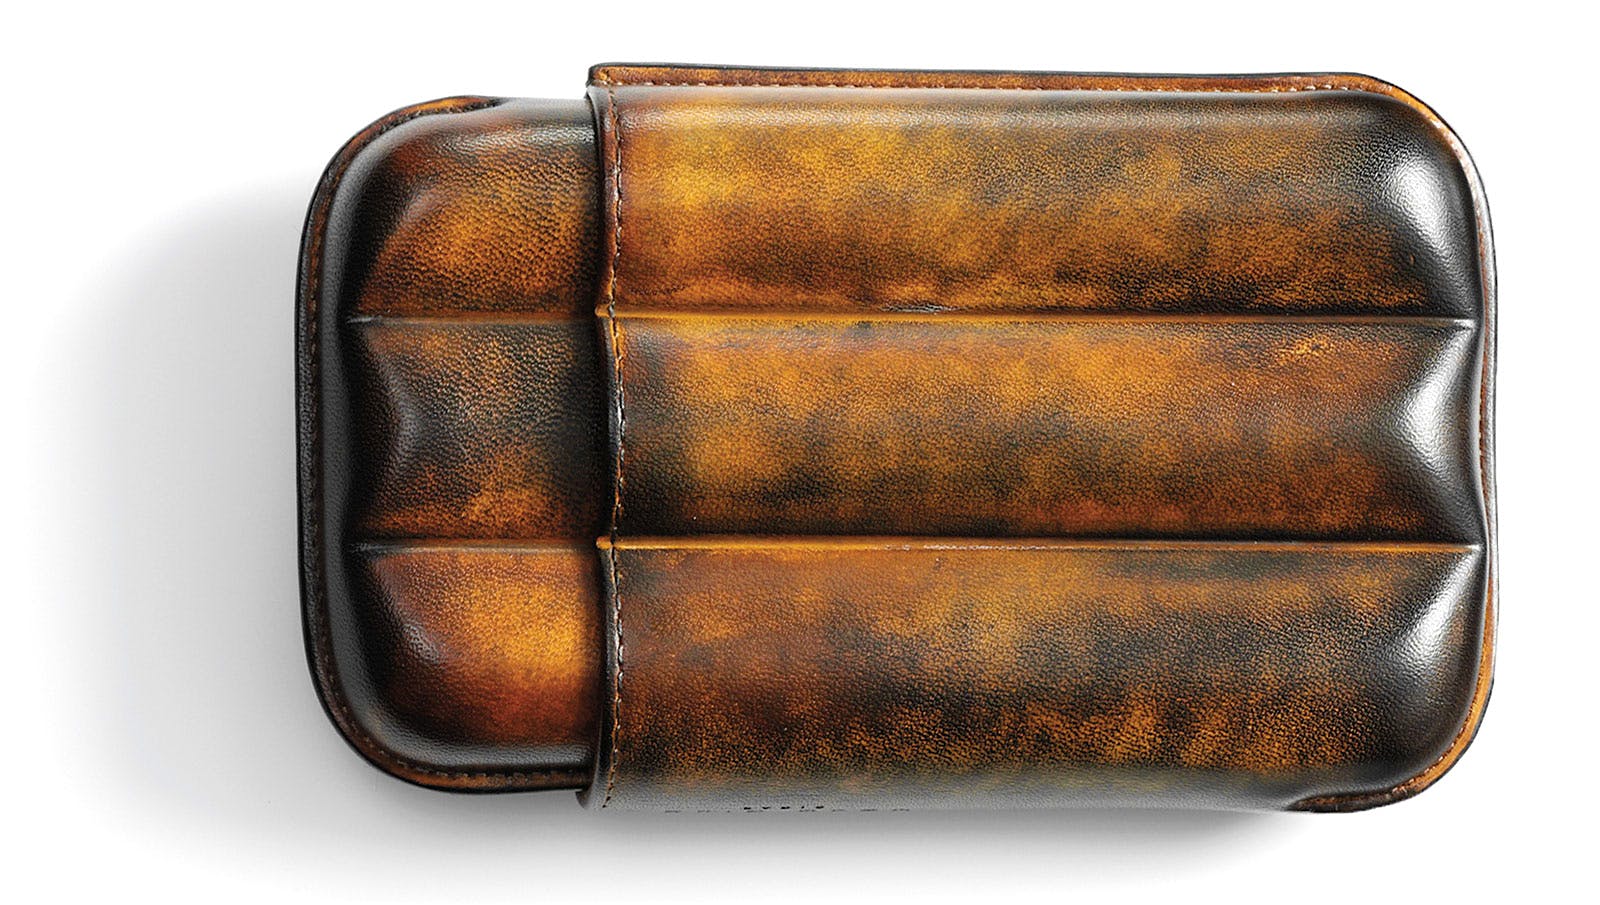 Elie Bleu’s Havana Patina Leather 3 Cigar Case is meticulously oiled and colored to achieve a patina reminiscent of the rich, deep hues of aged leather.